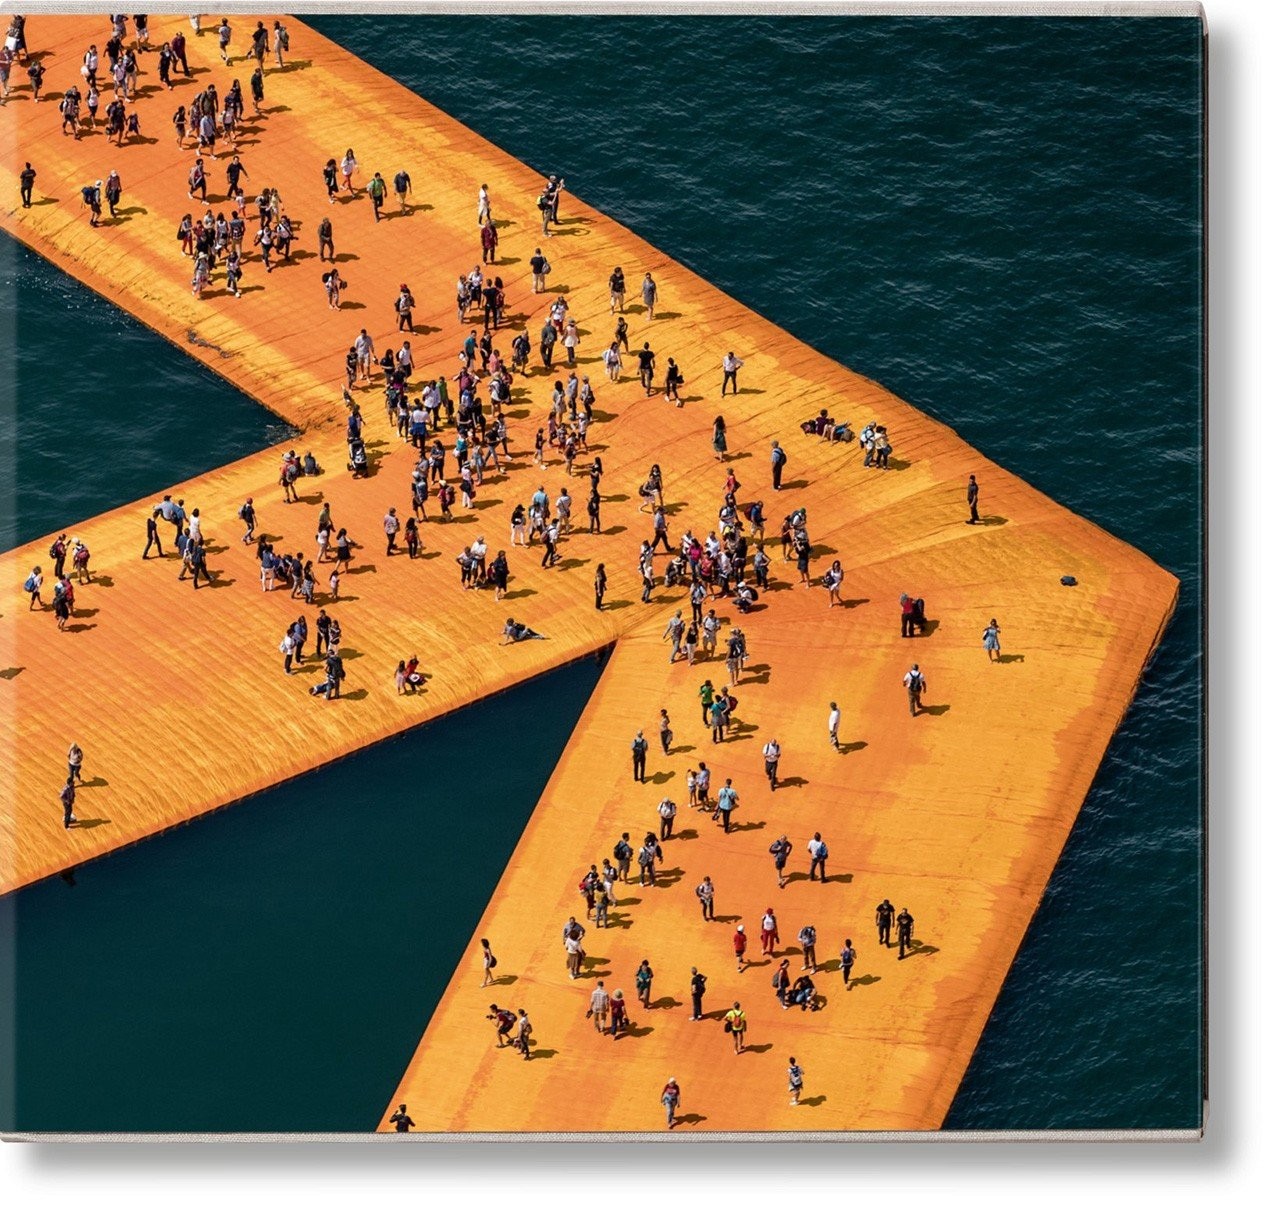 ce-christo-floating-piers-cover-06916.jpg